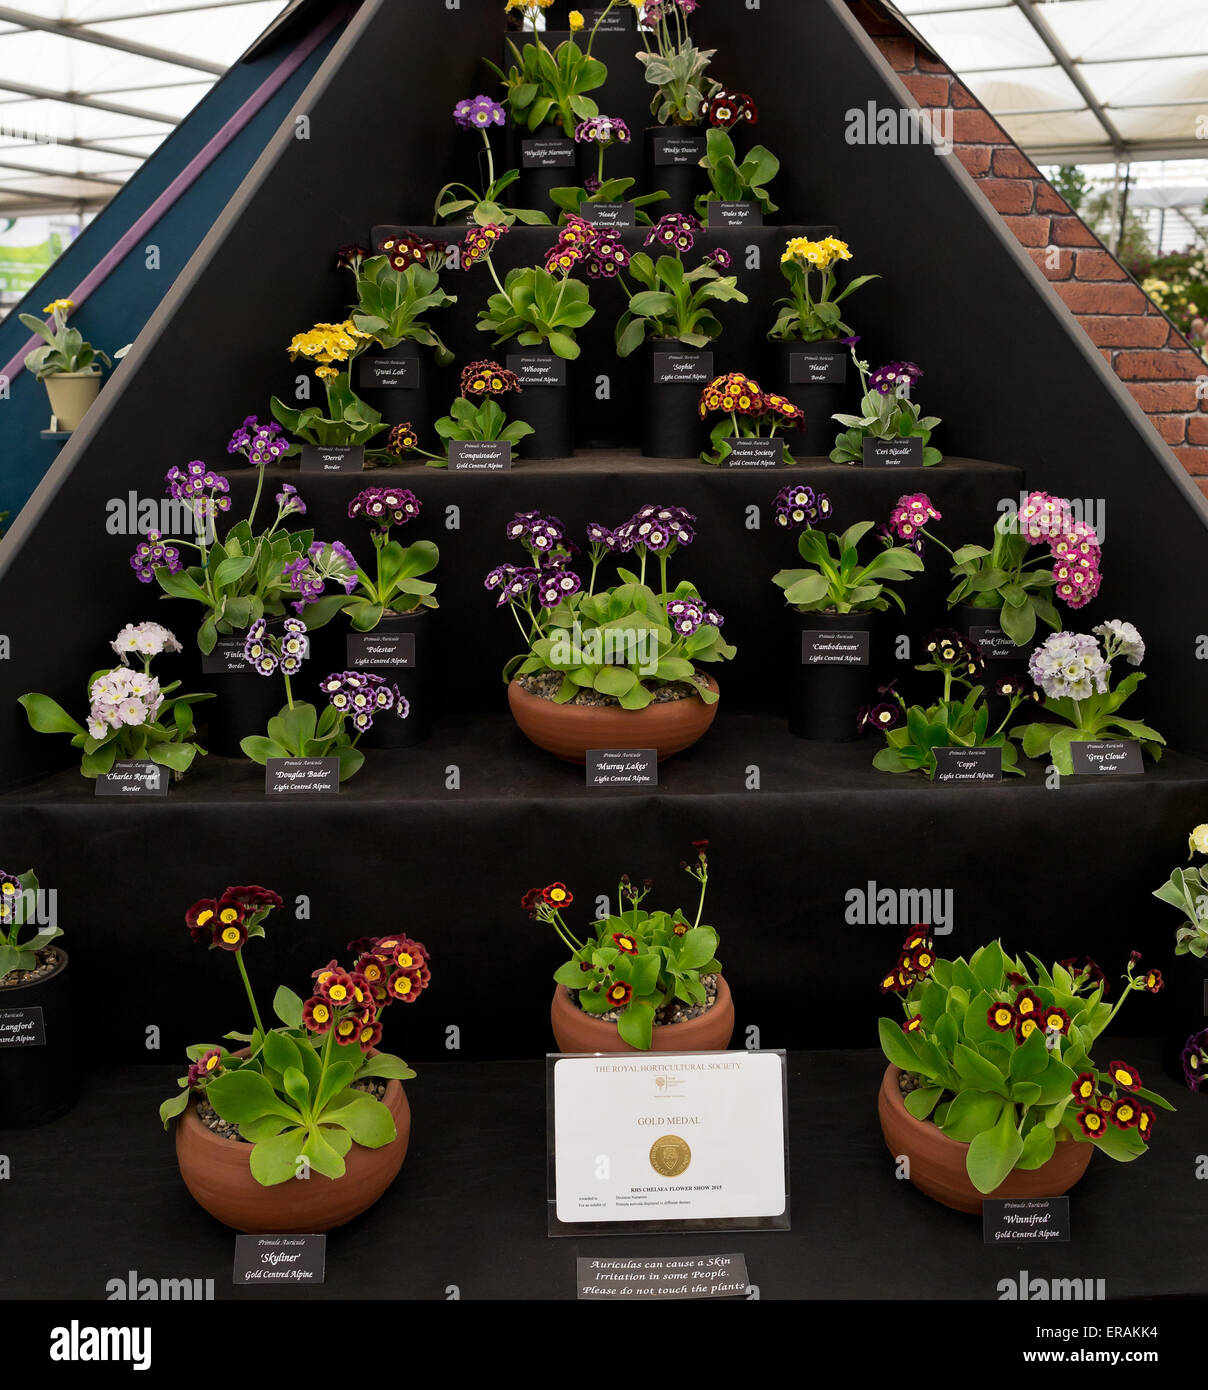 Primula auricula (mountain cowslip, bear's ear)  flower display at the Great Pavillon at the RHS Chelsea Flower Show 2015 - gold Stock Photo